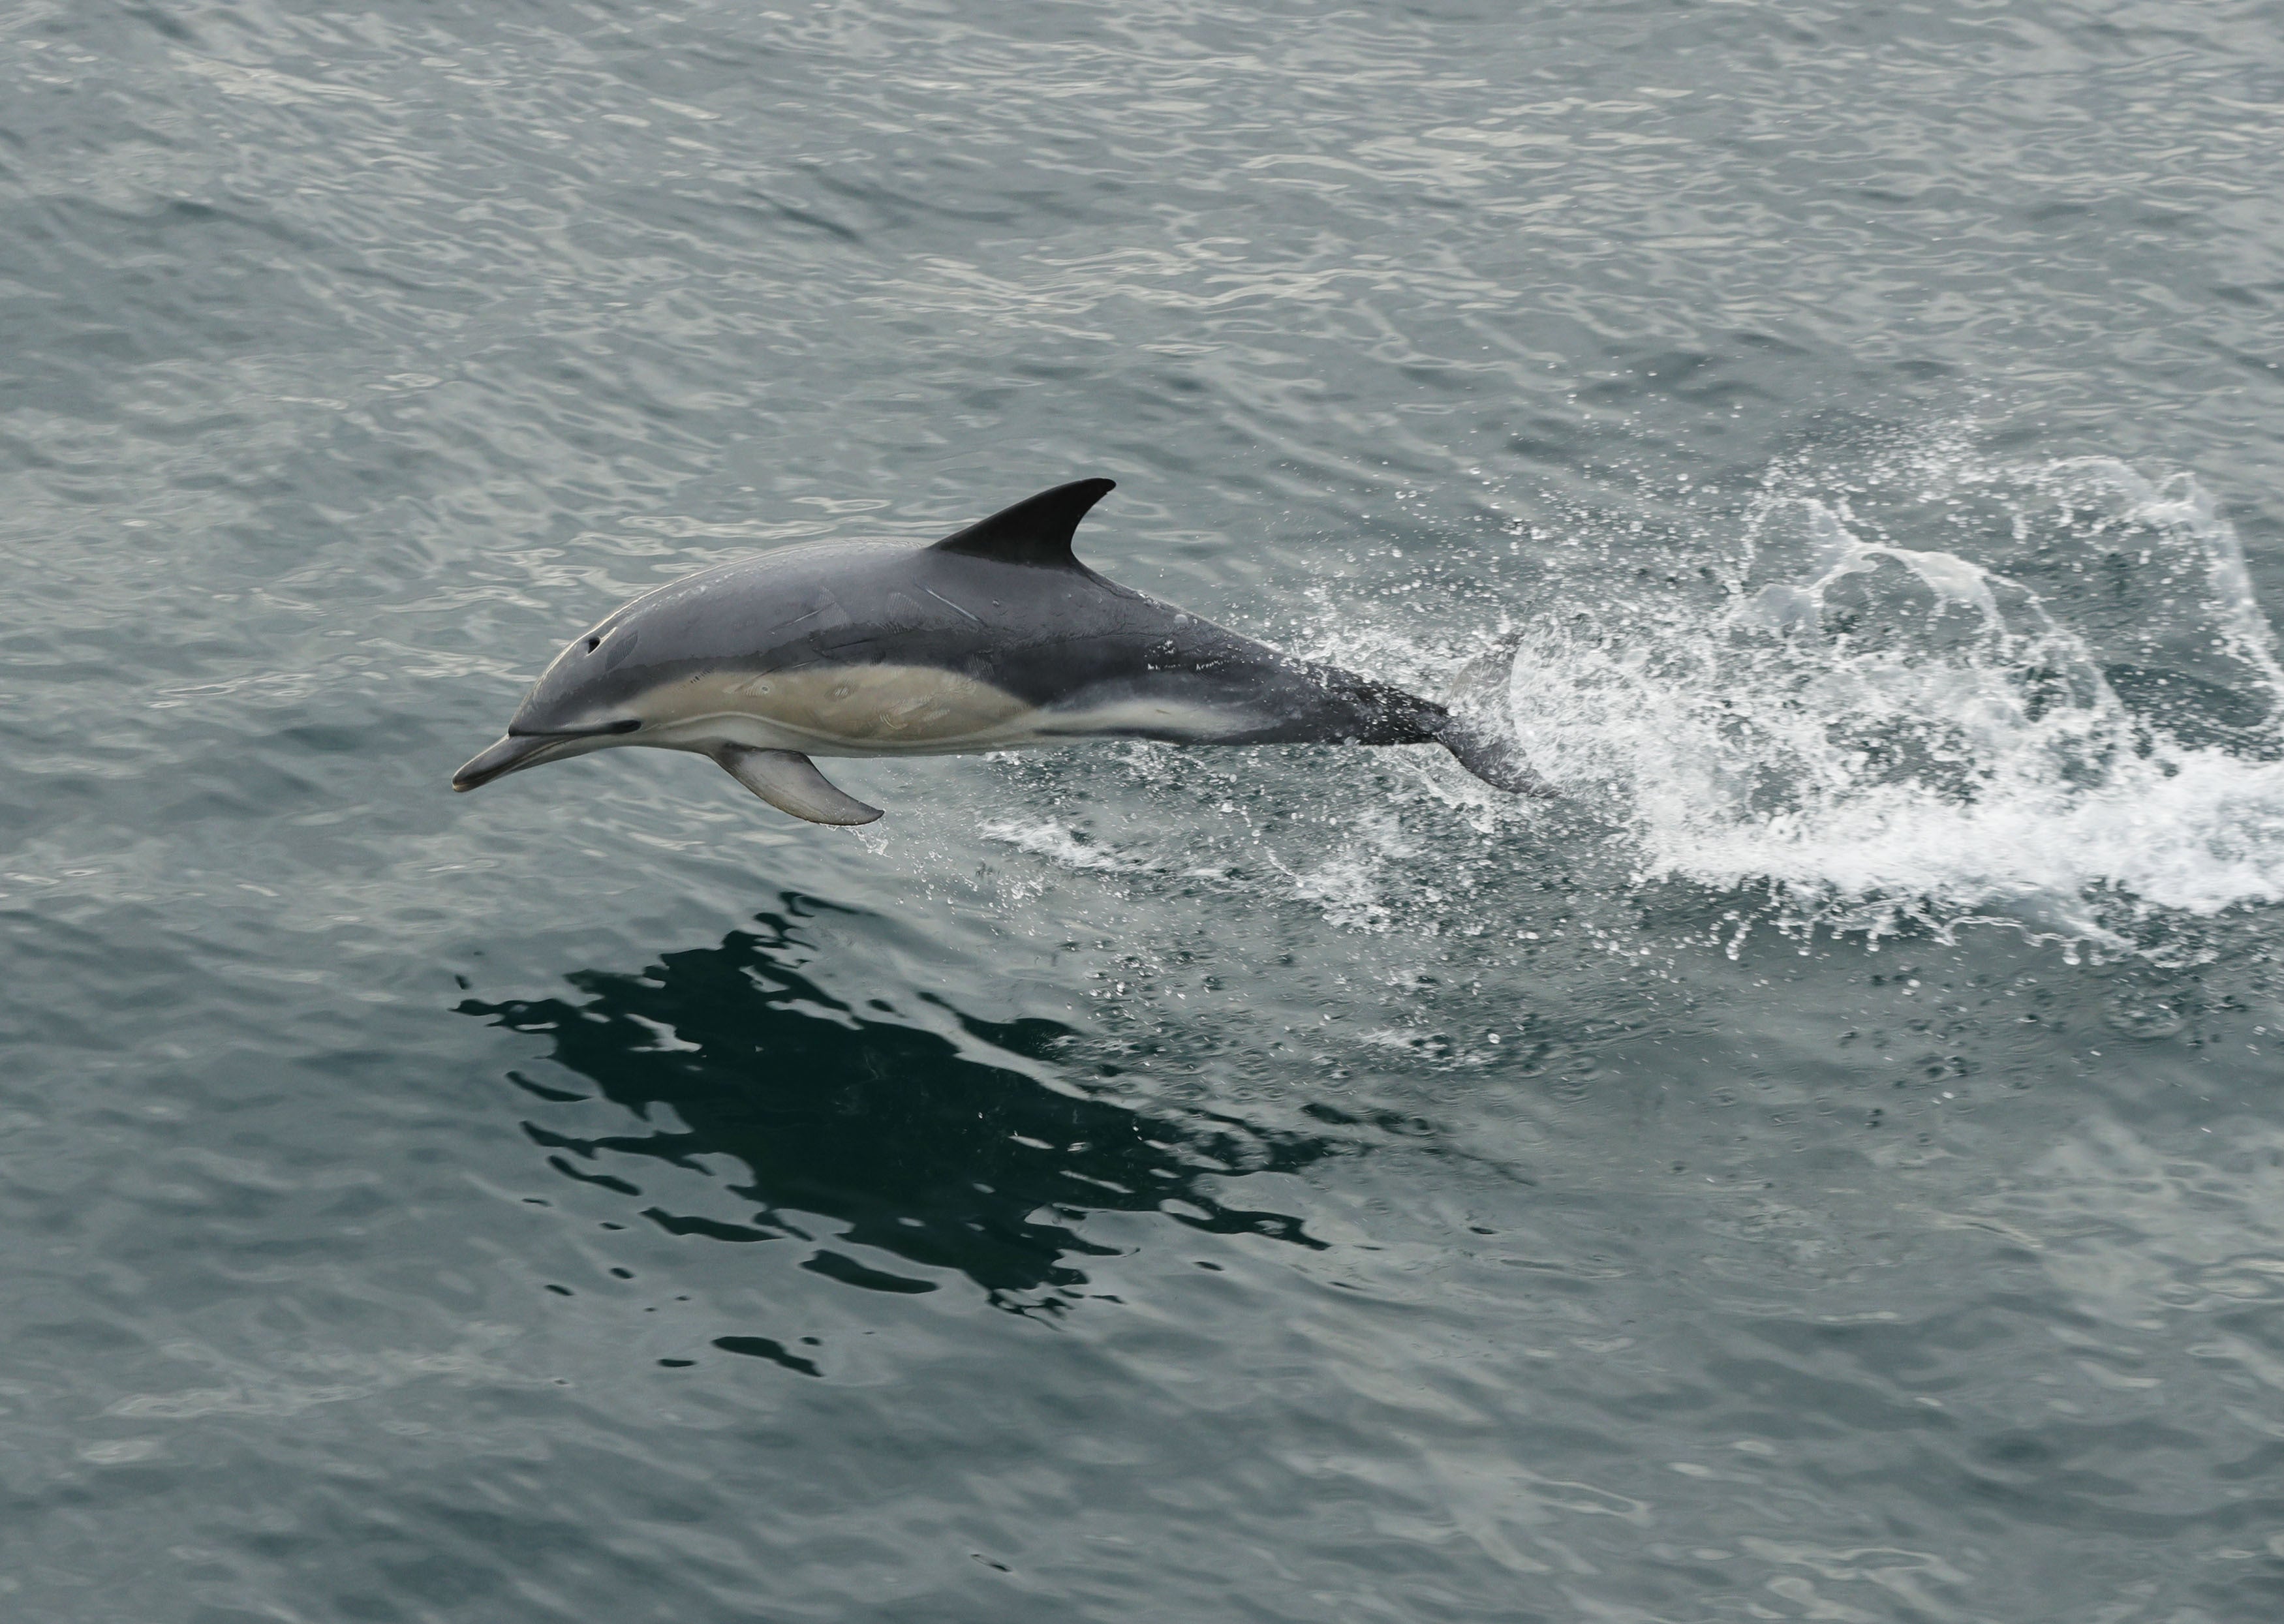 Dolphins are among the marine mammals at risk from the inconsistent research approaches (Yui Mok/PA)